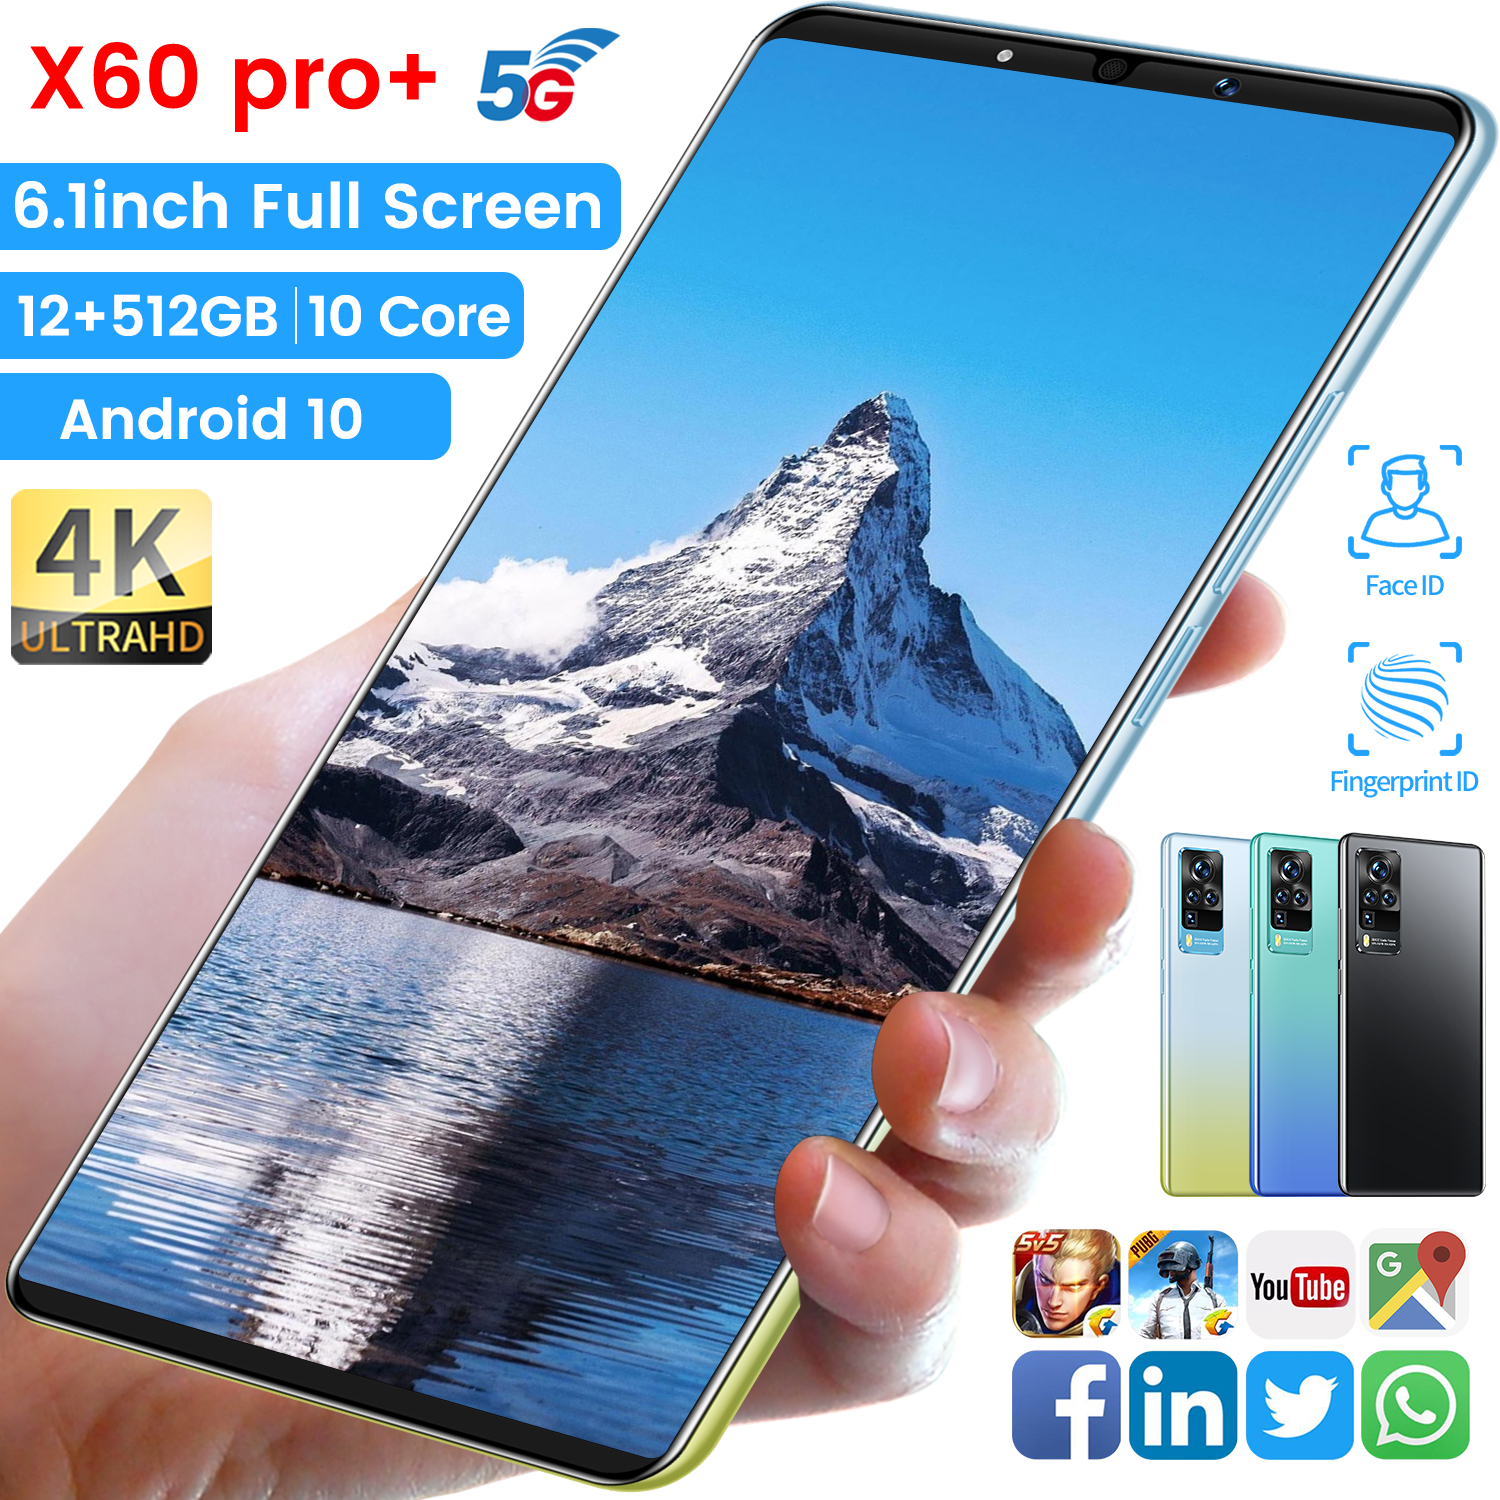 X60 Pro+ 6.1 HD Display 1440*3200 Mobile Phone Wireless WiFi 5200Mah battery Fast Charging Android 10 12+512GB Memory Smartphone